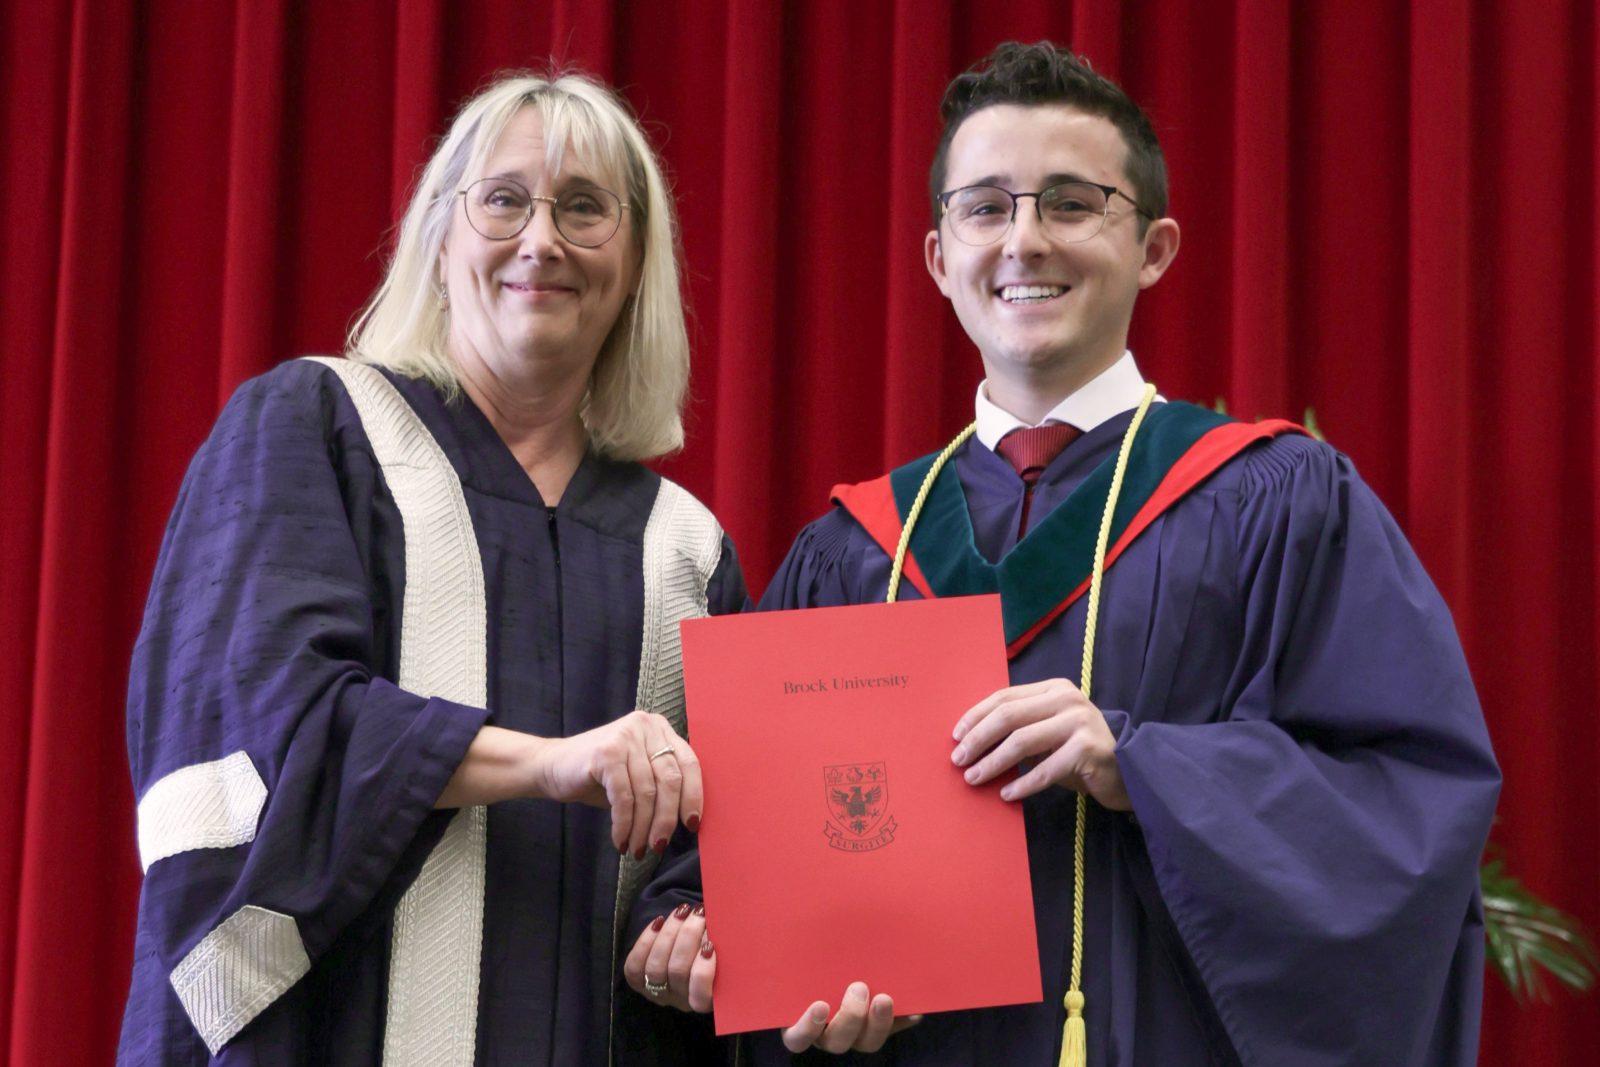 A woman and a man in graduation robes hold a red certificate between them.